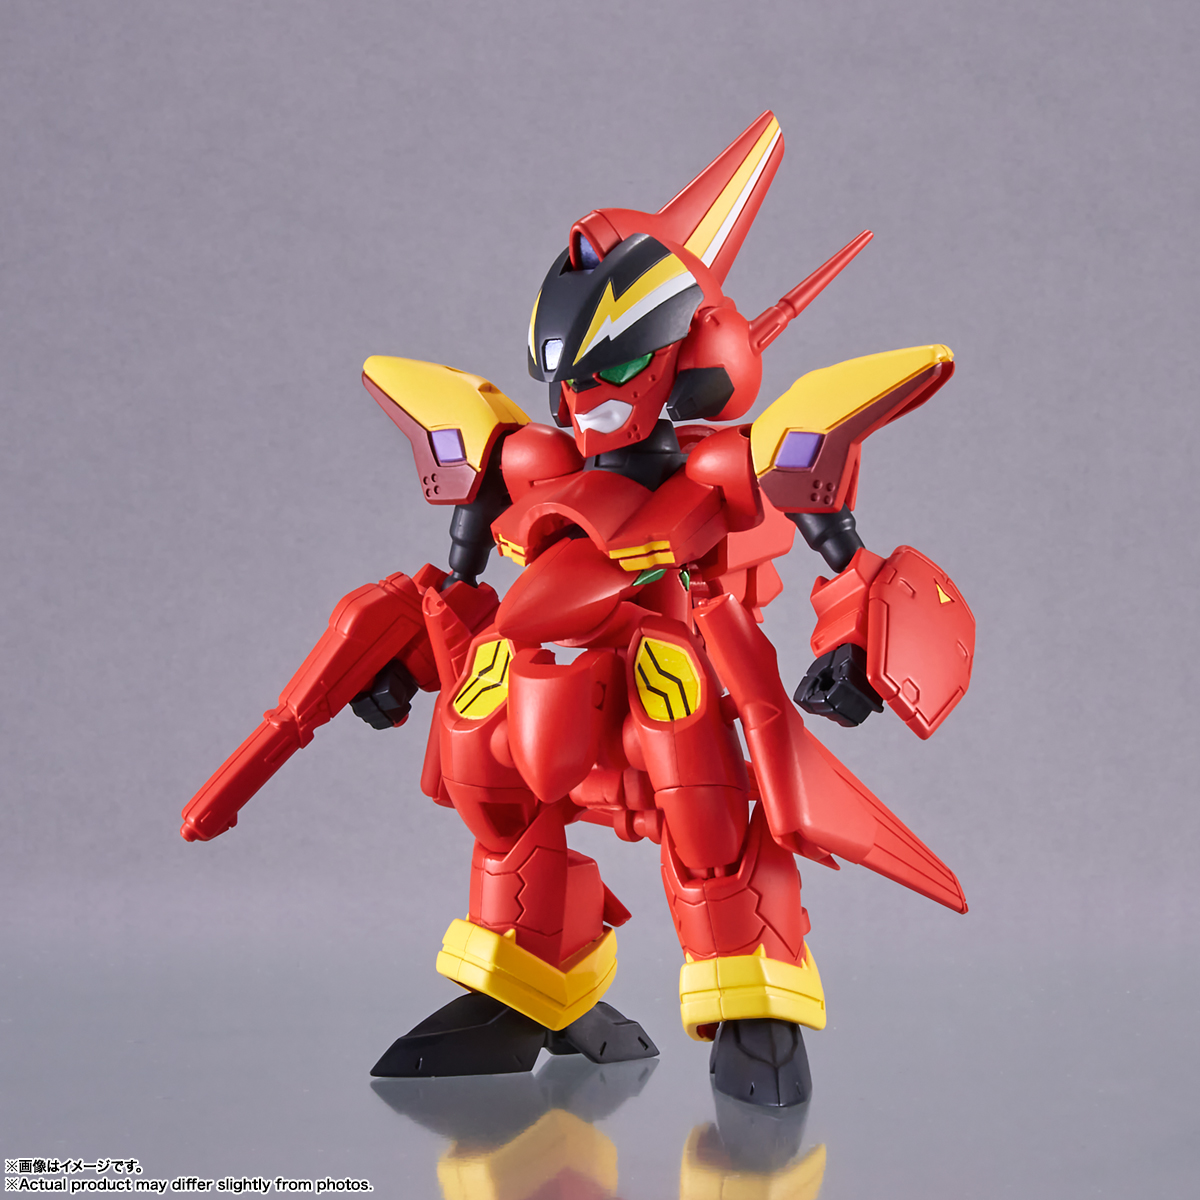 macross-7-vf-19-custom-fire-valkyrie-and-basara-nekki-tiny-session-action-figure-set image count 2